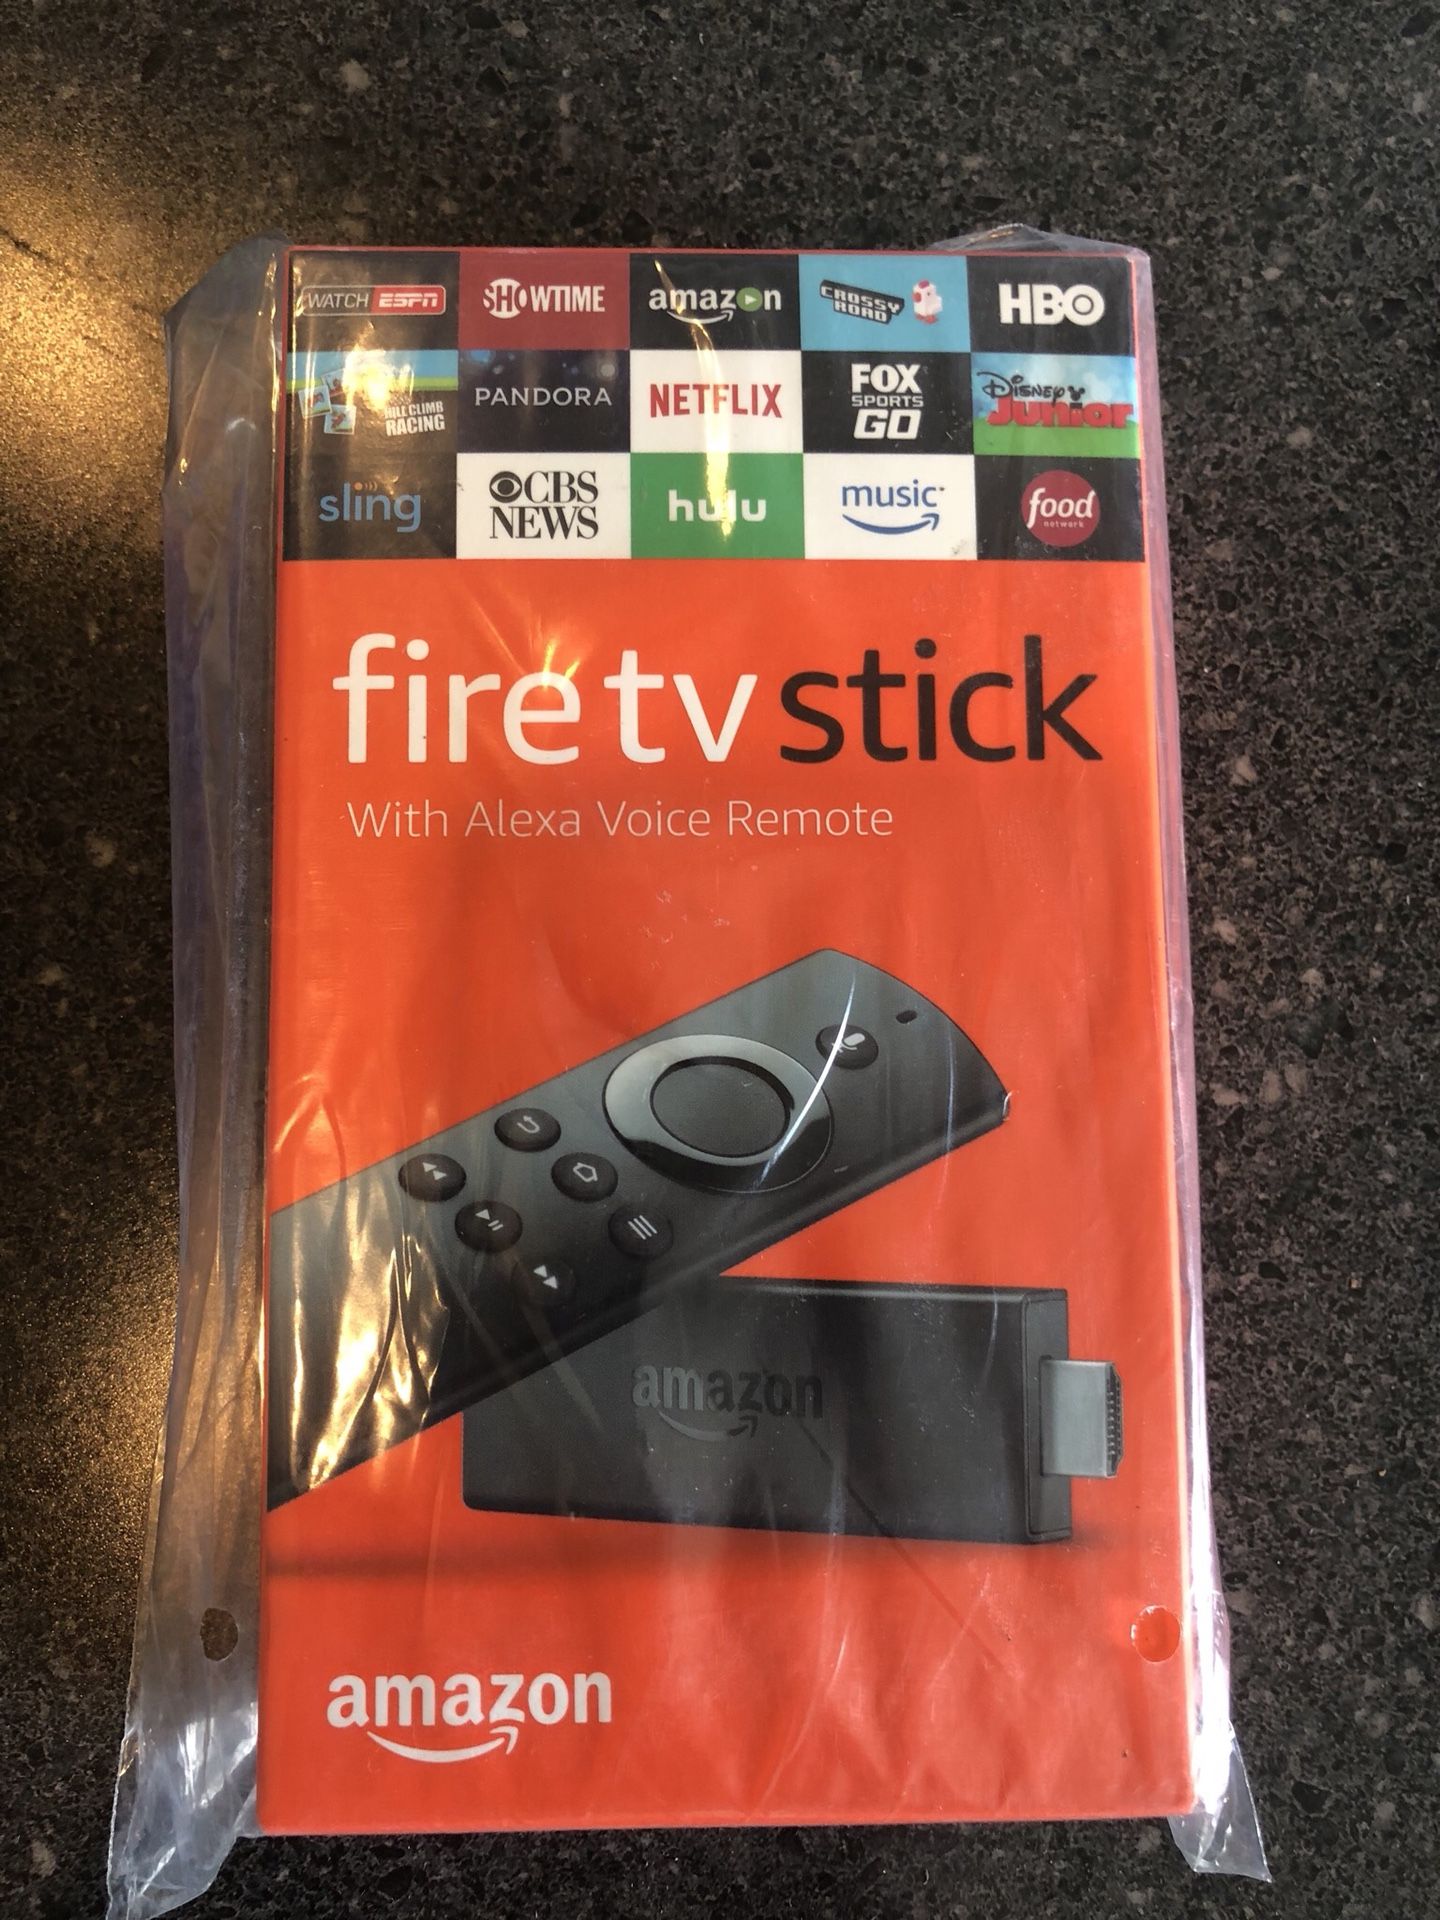 Amazon Fire TV stick with Alexa Voice Remote brand new sealed in box